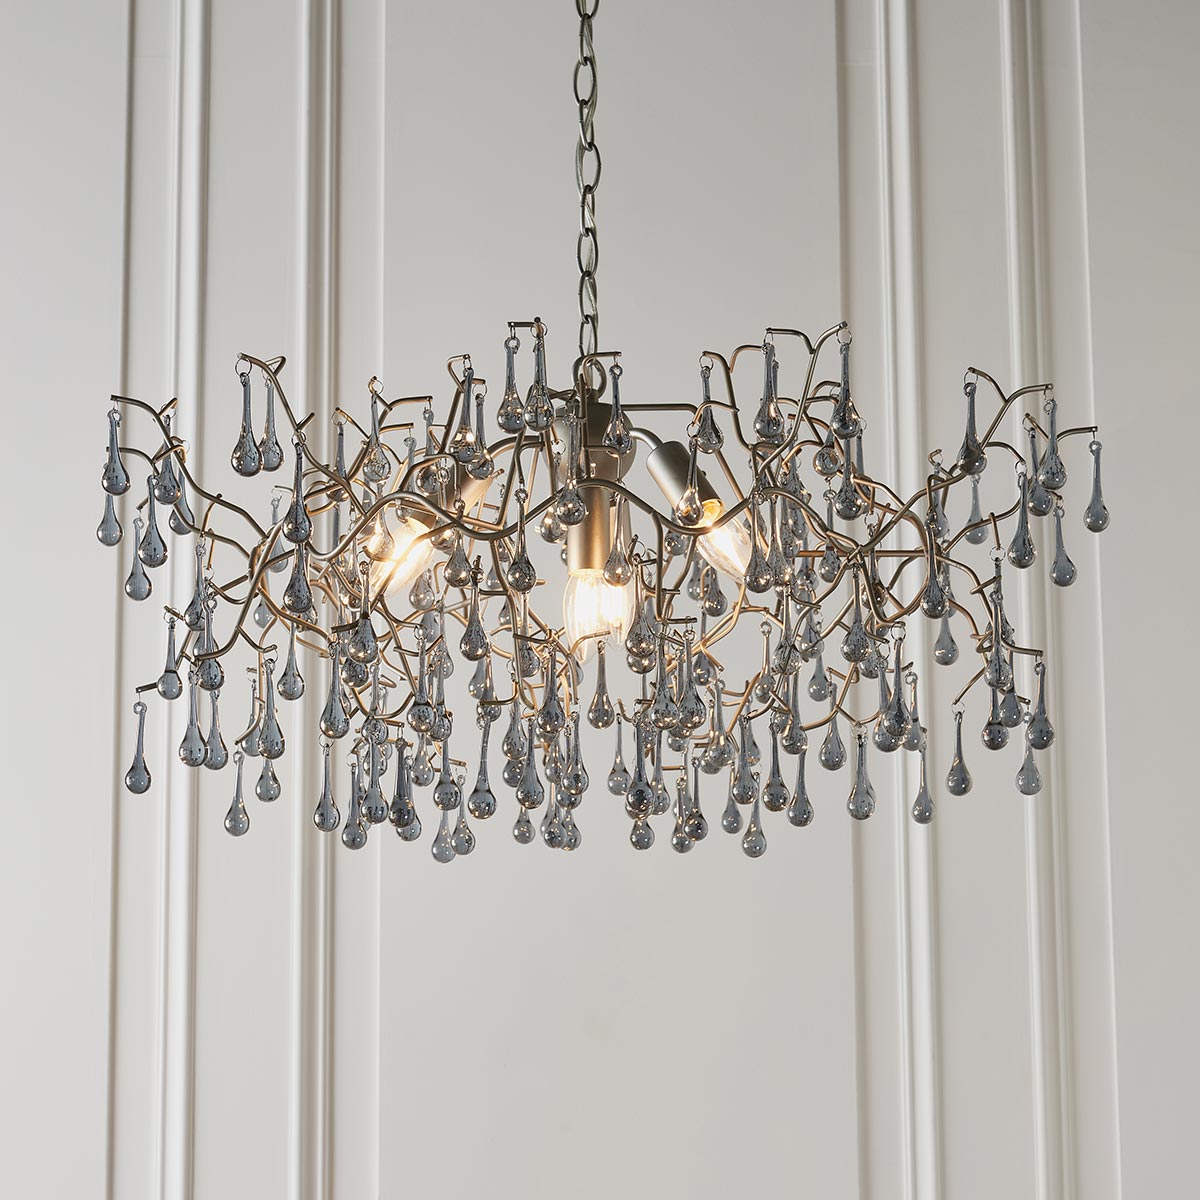 Aged Silver Finish Branch 4 Light Chandelier With Smoked Glass Drops